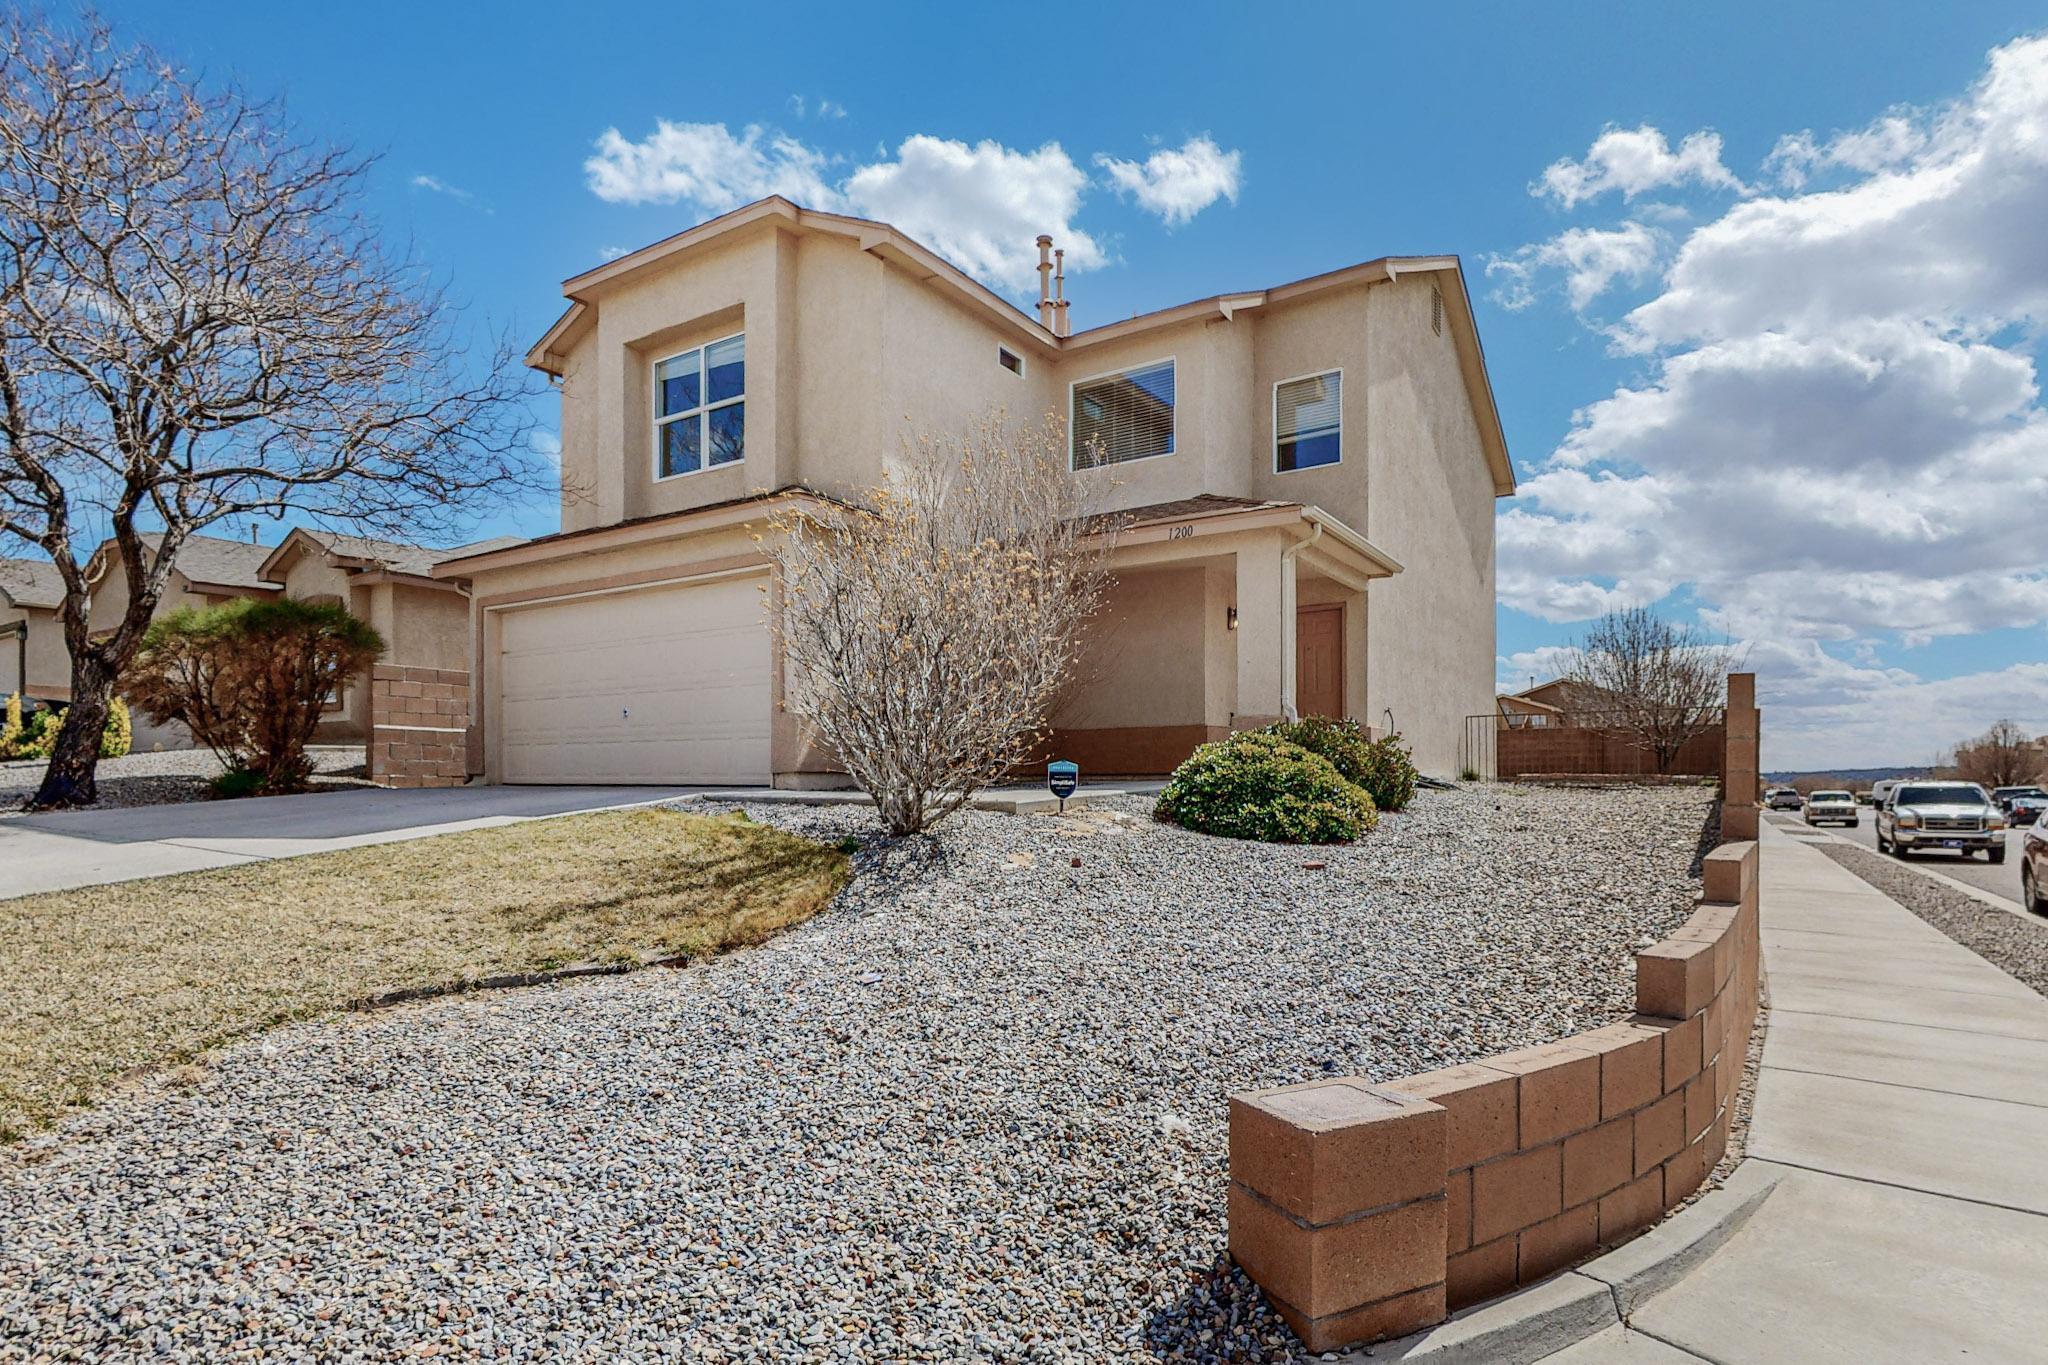 PRICE DROP!!!!Welcome to the serene neighborhood of Northern Meadows! This 3 bedroom, 2.5 bathroom home is located on a quiet corner lot, just steps away from Havasu Park and several access points to the trail system that runs through the community. All bedrooms are located on the upstairs floor, including the large primary suite that is equipped with a huge walk in closet that is sure to delight you! The loft space is perfect as an additional family room, office, or gym space!  This home is ready for your personal touches to make it shine!  If you are looking for a neighborhood with a sense of community, look no further, you have found your future home! Property being sold as-is.